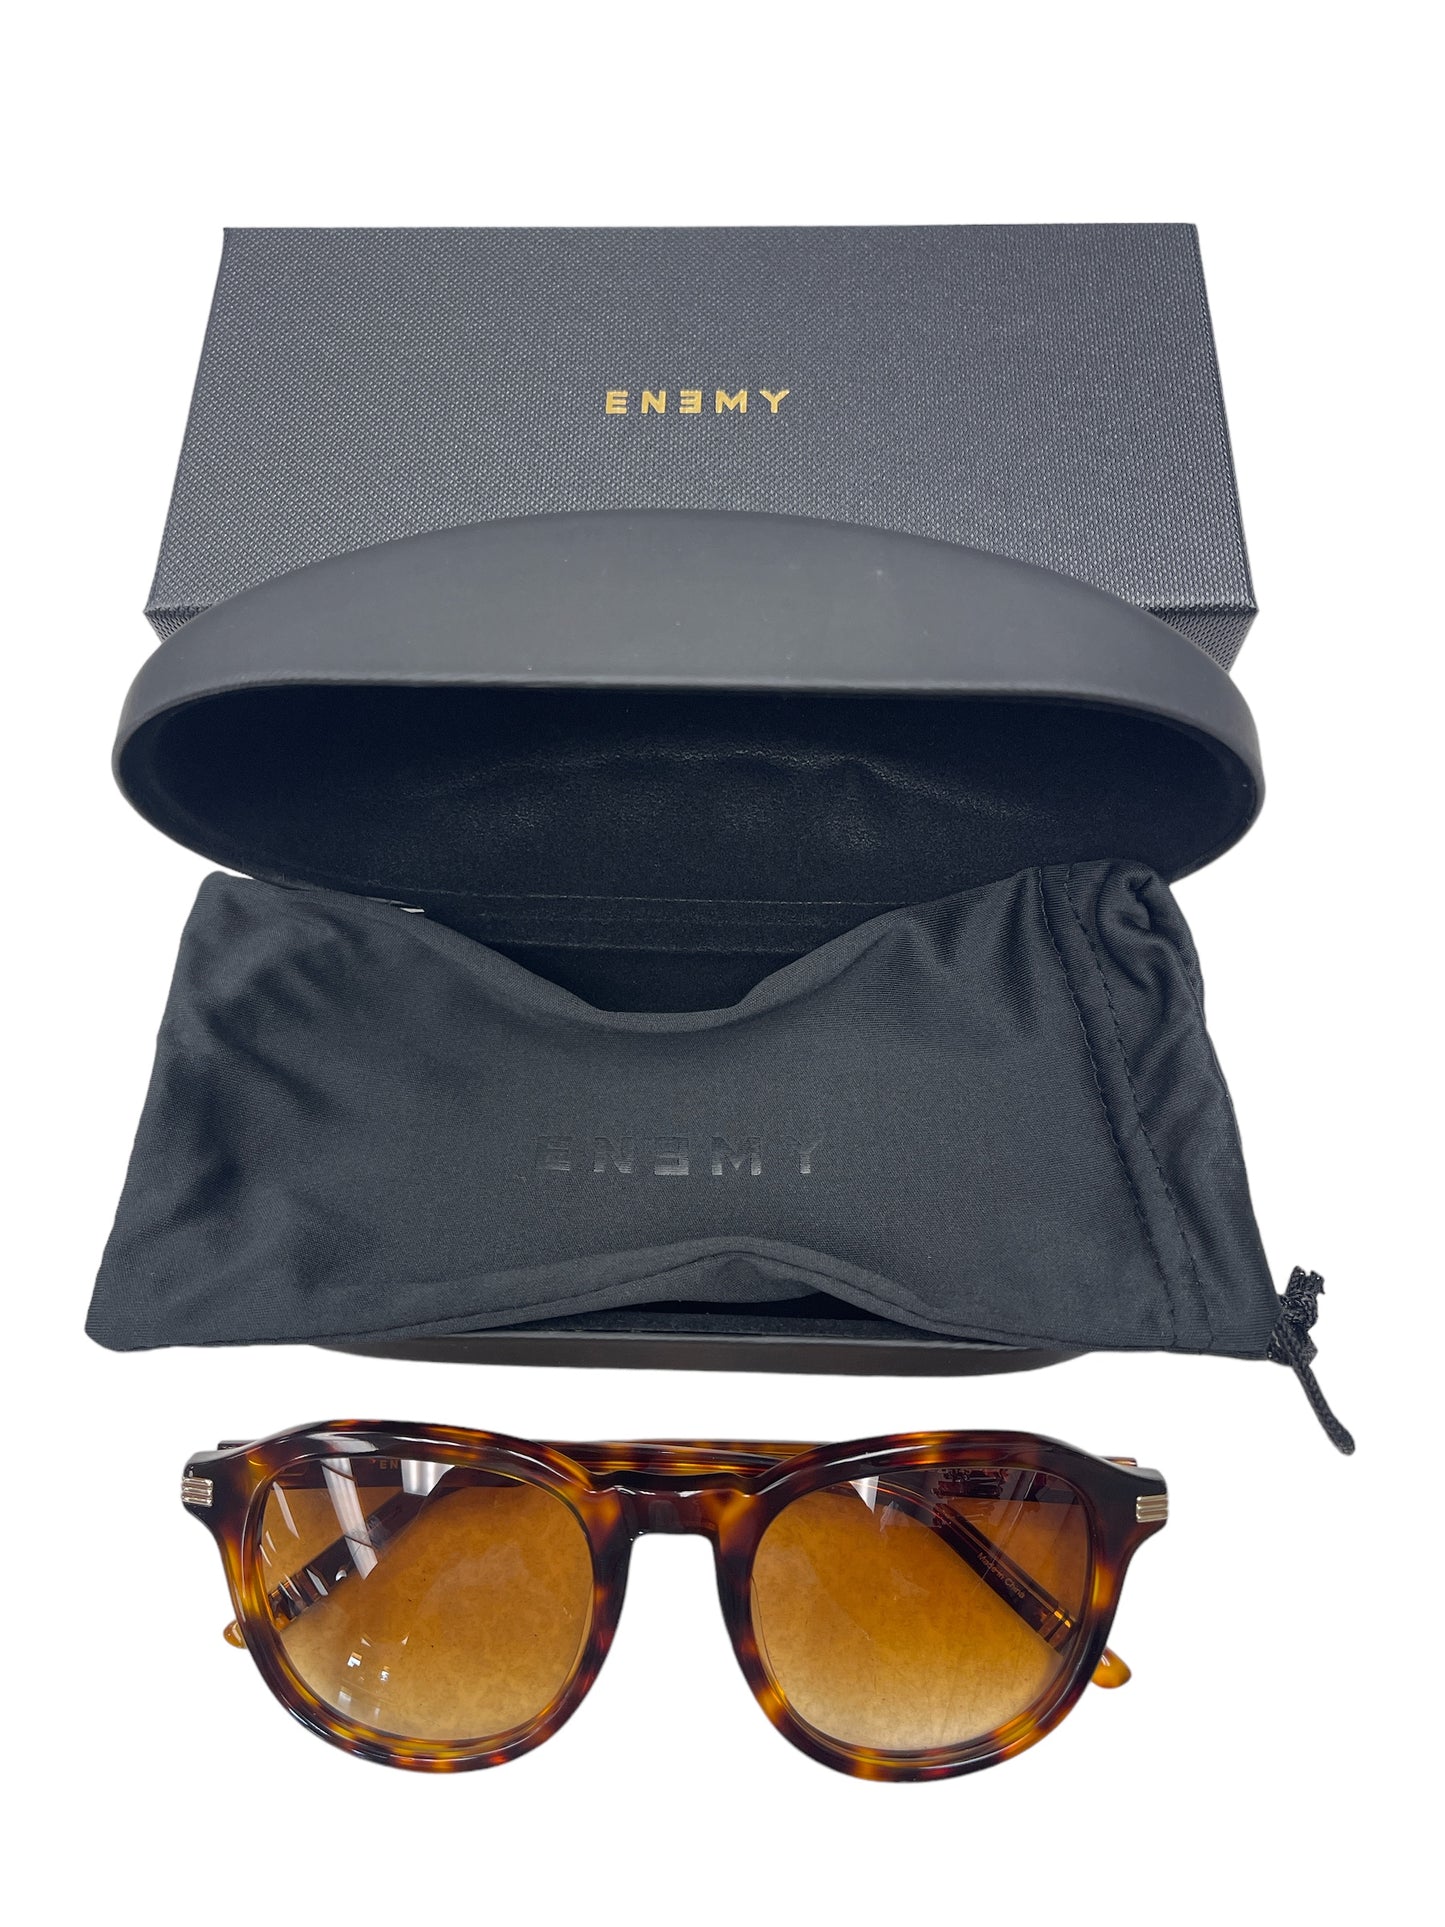 Sunglasses By Enemy